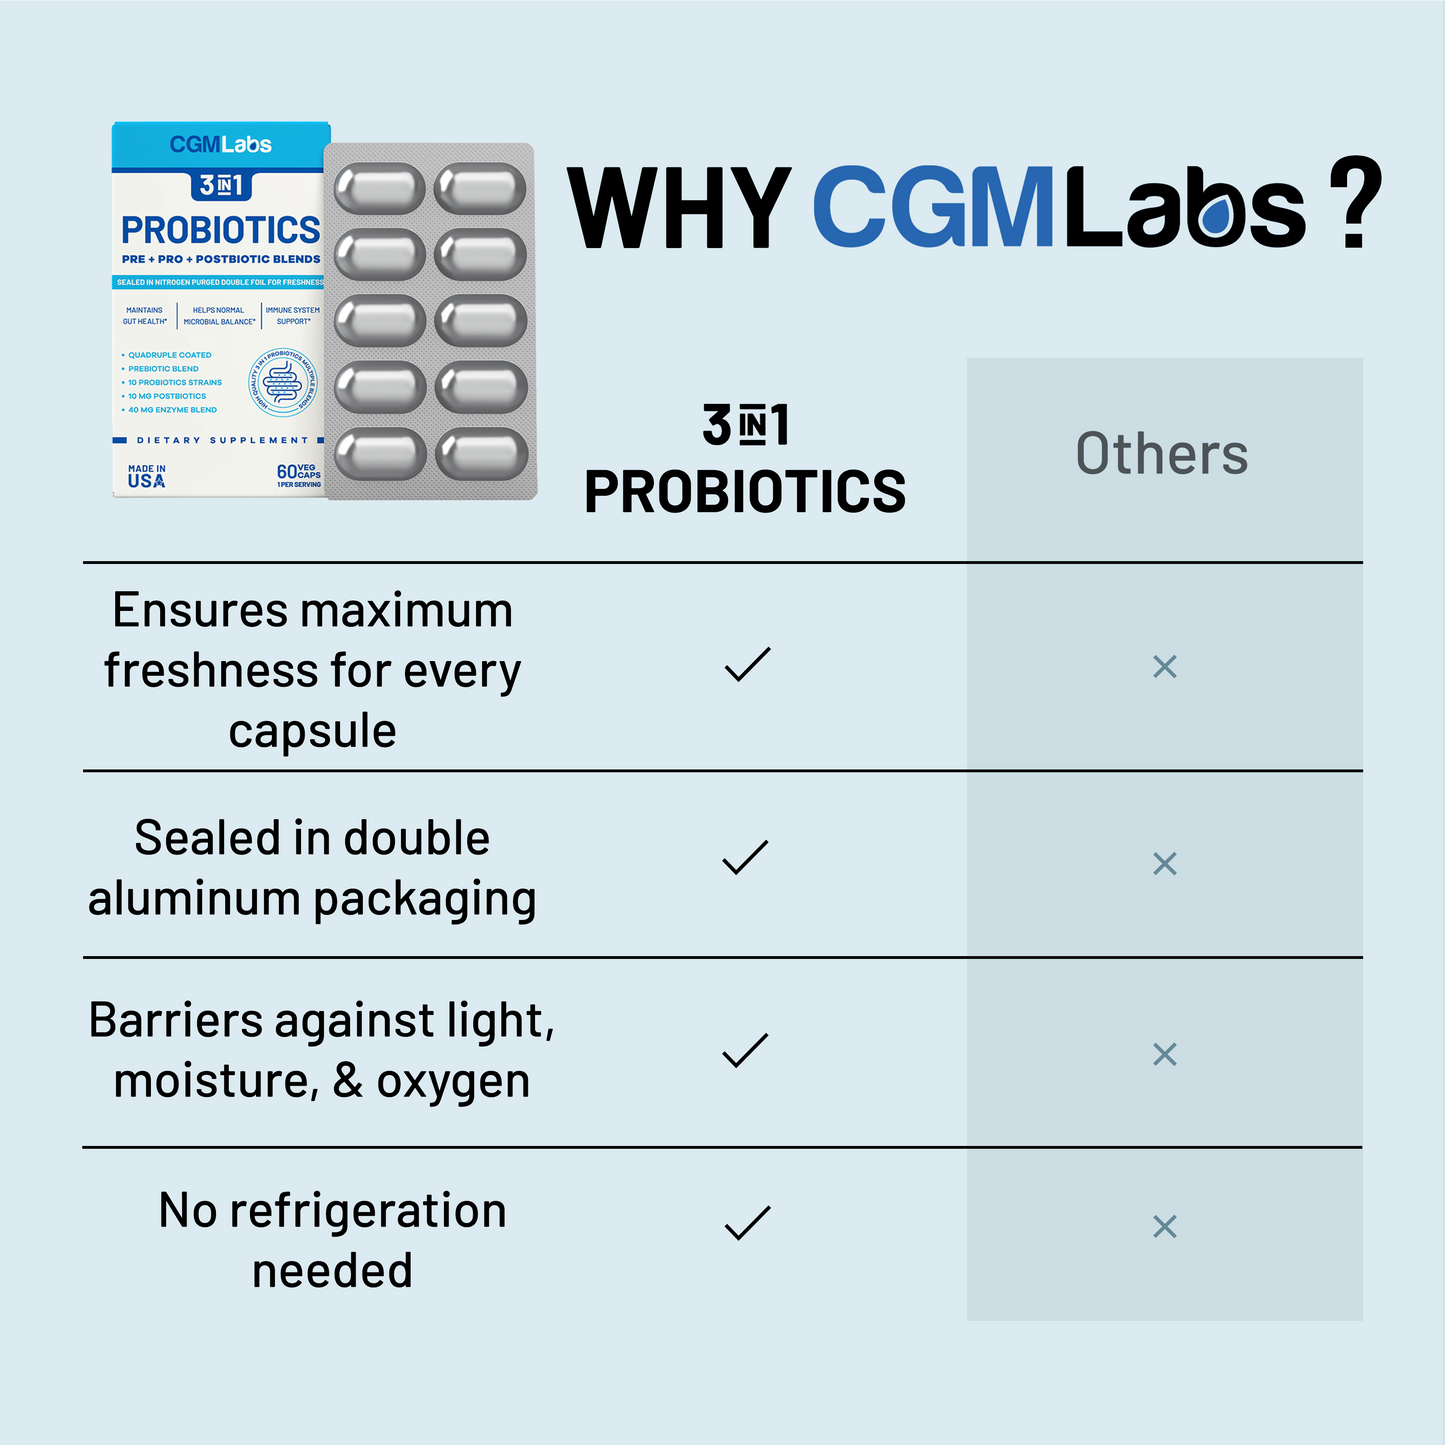 3 in 1 Probiotics - Prebiotics + Probiotics + Postbiotics All in one! Nitrogen Purged, Individually Packed in Double-foil Blister for Freshness by CGM Labs